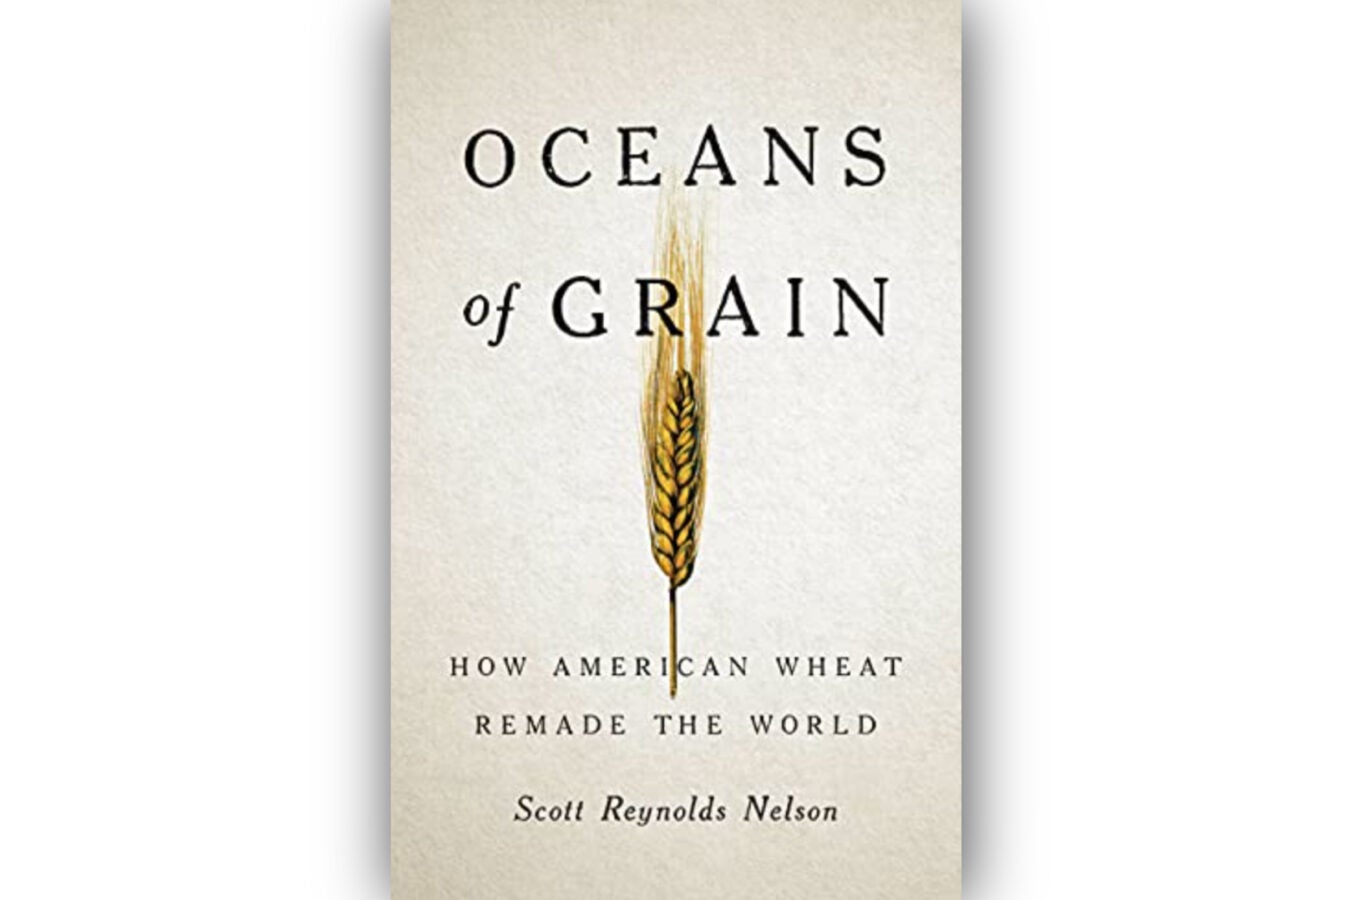 Book cover: "Oceans of Grain: How American Wheat Remade the World."